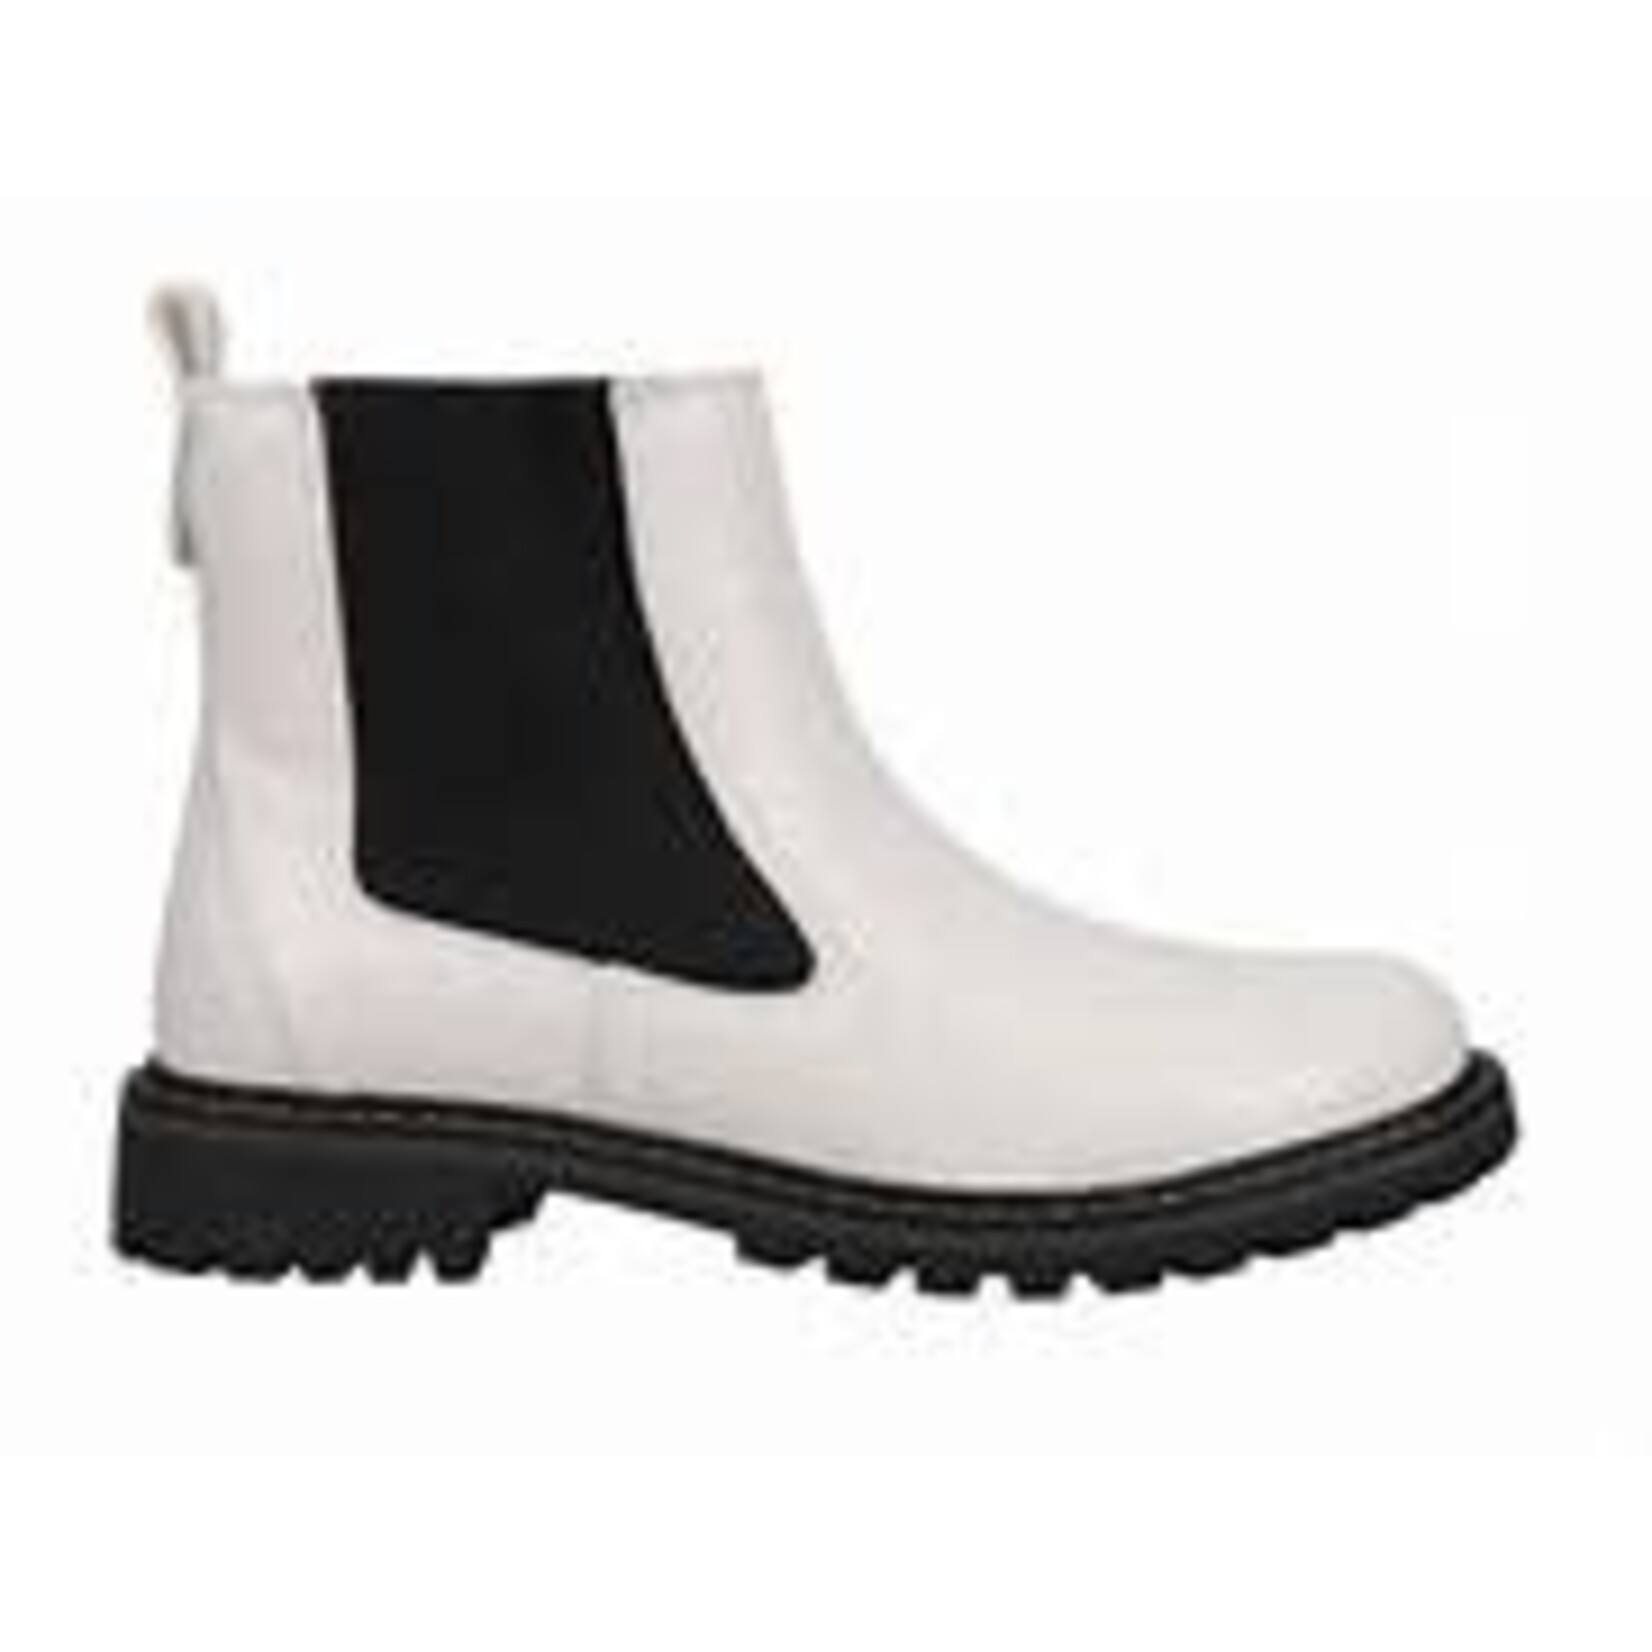 Corkys Corkys To Be Honest Boots White sz 8